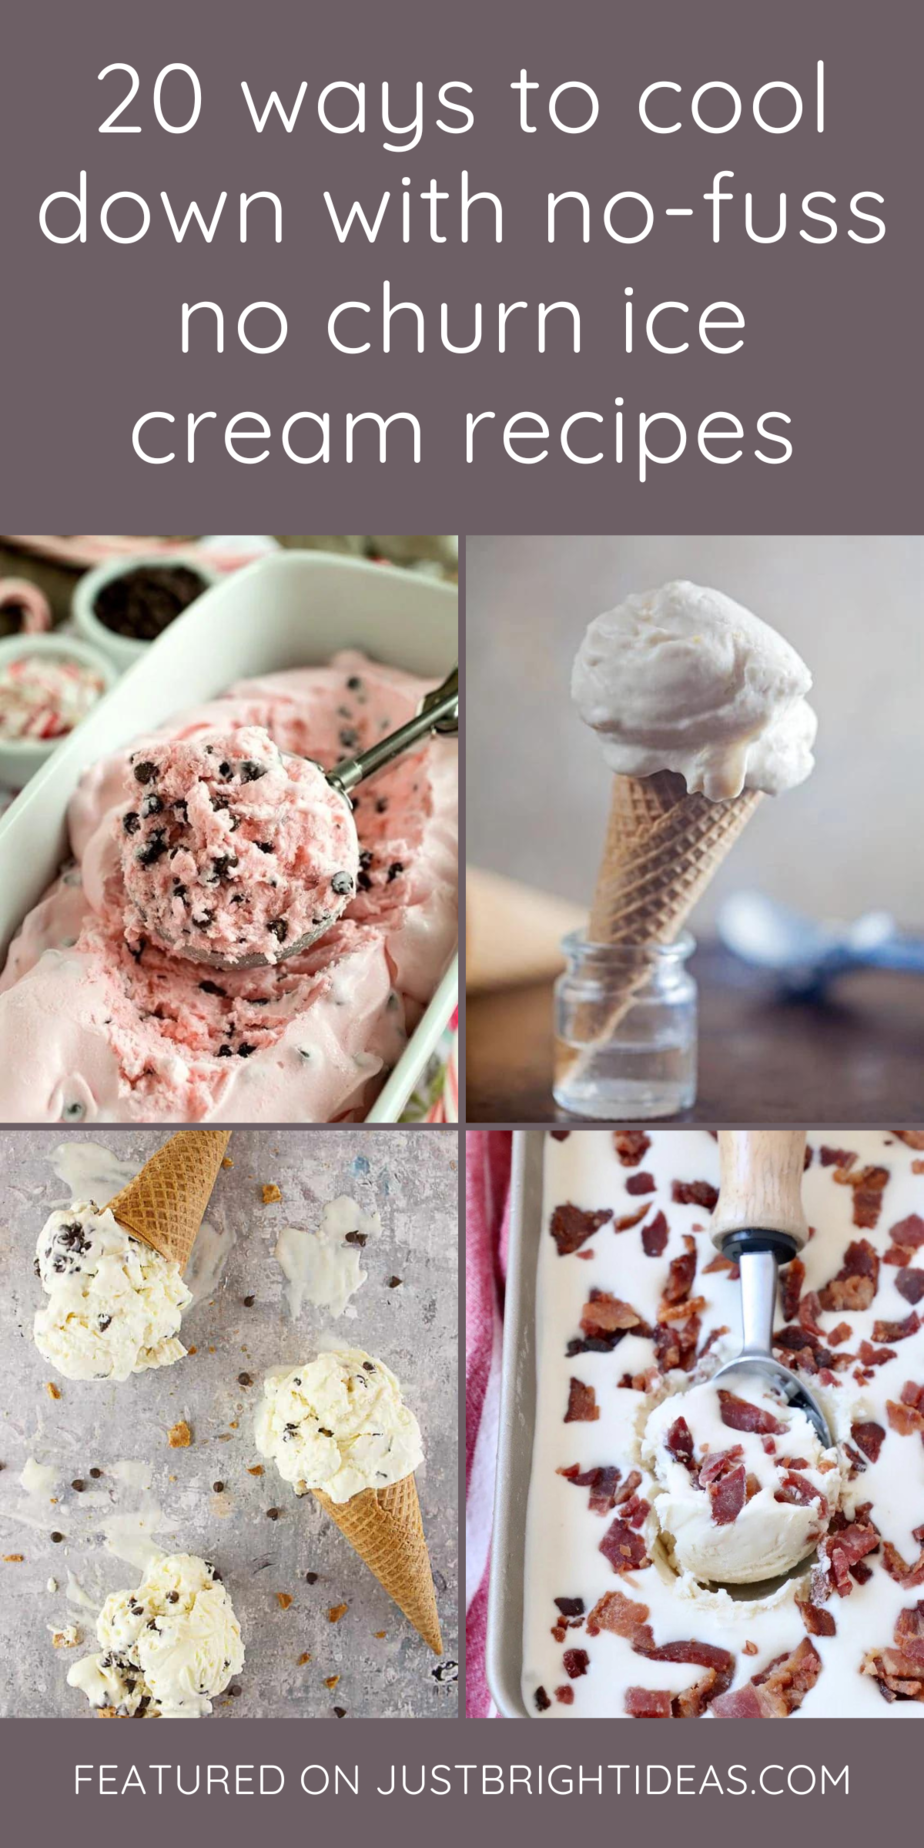 🍦20 ways to cool down with no-fuss no churn ice cream recipes